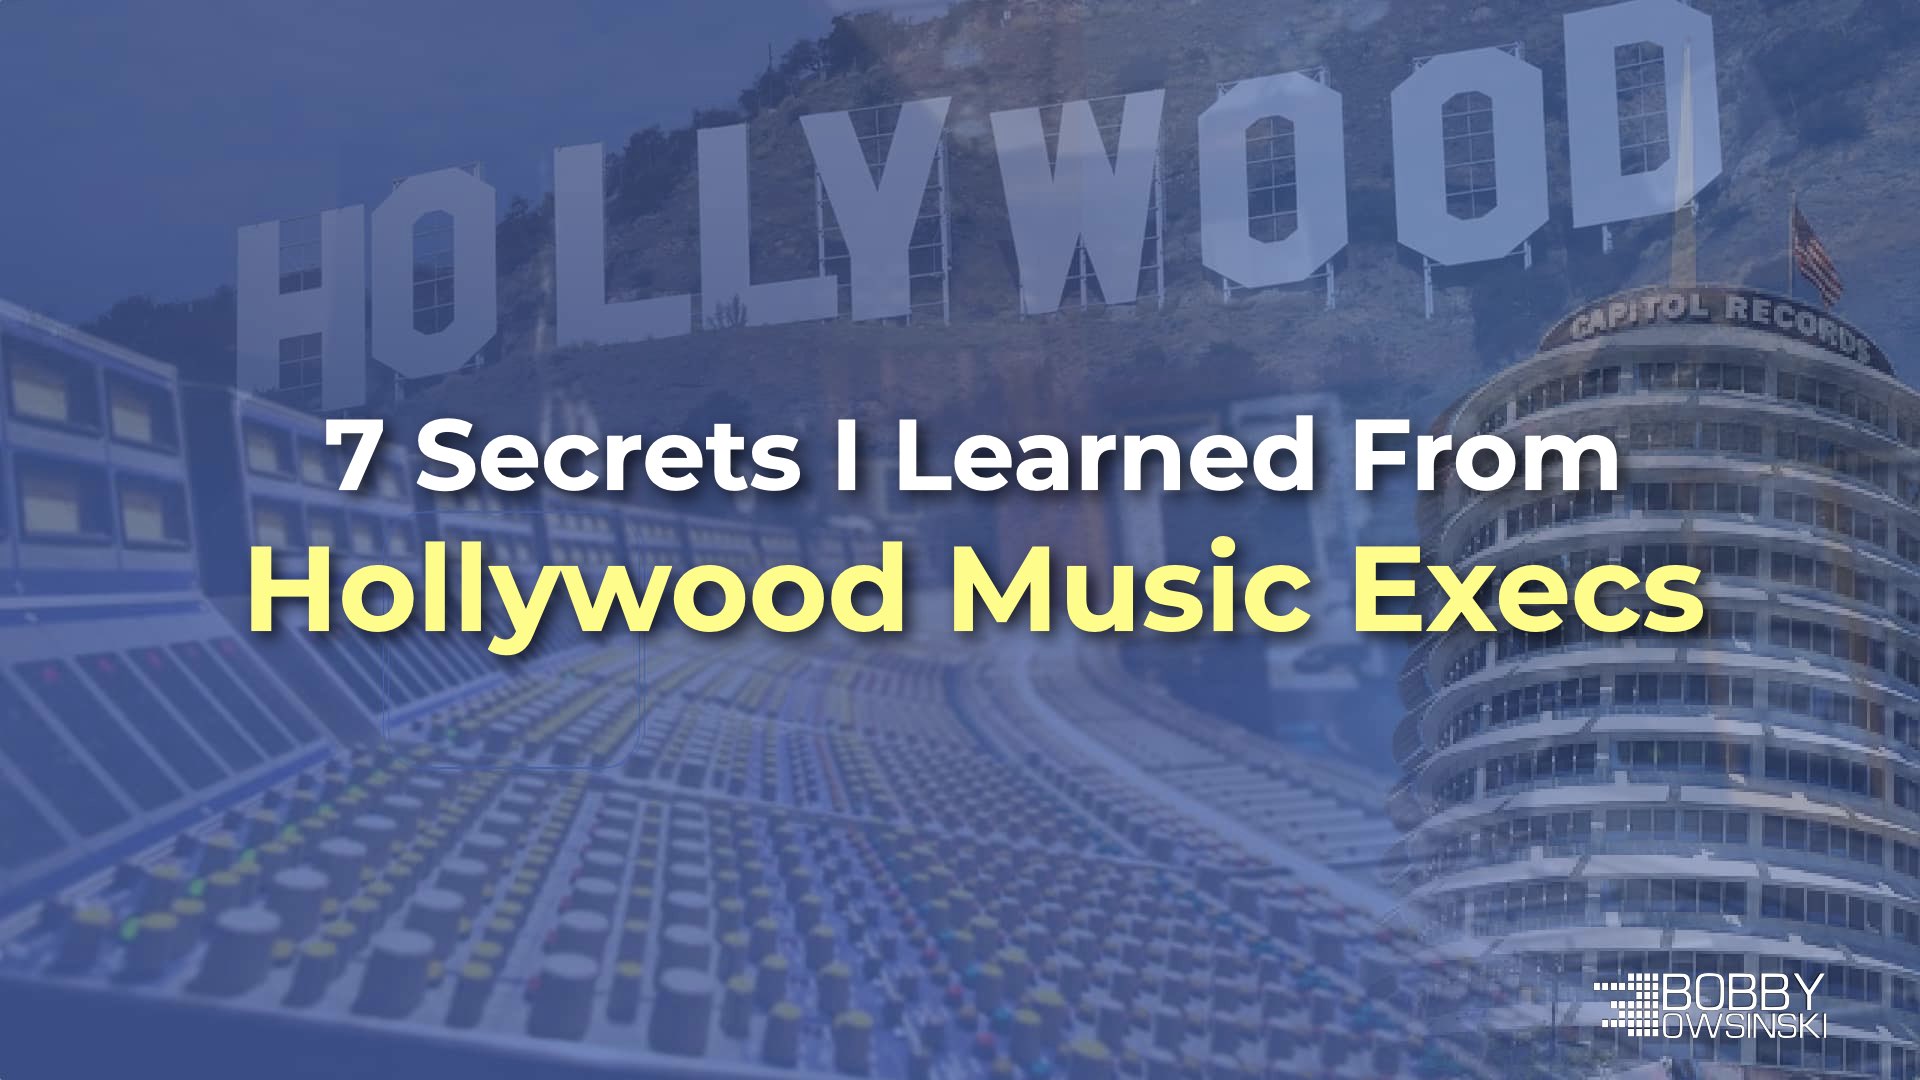 7 Secrets I Learned From Hollywood Music Execs 